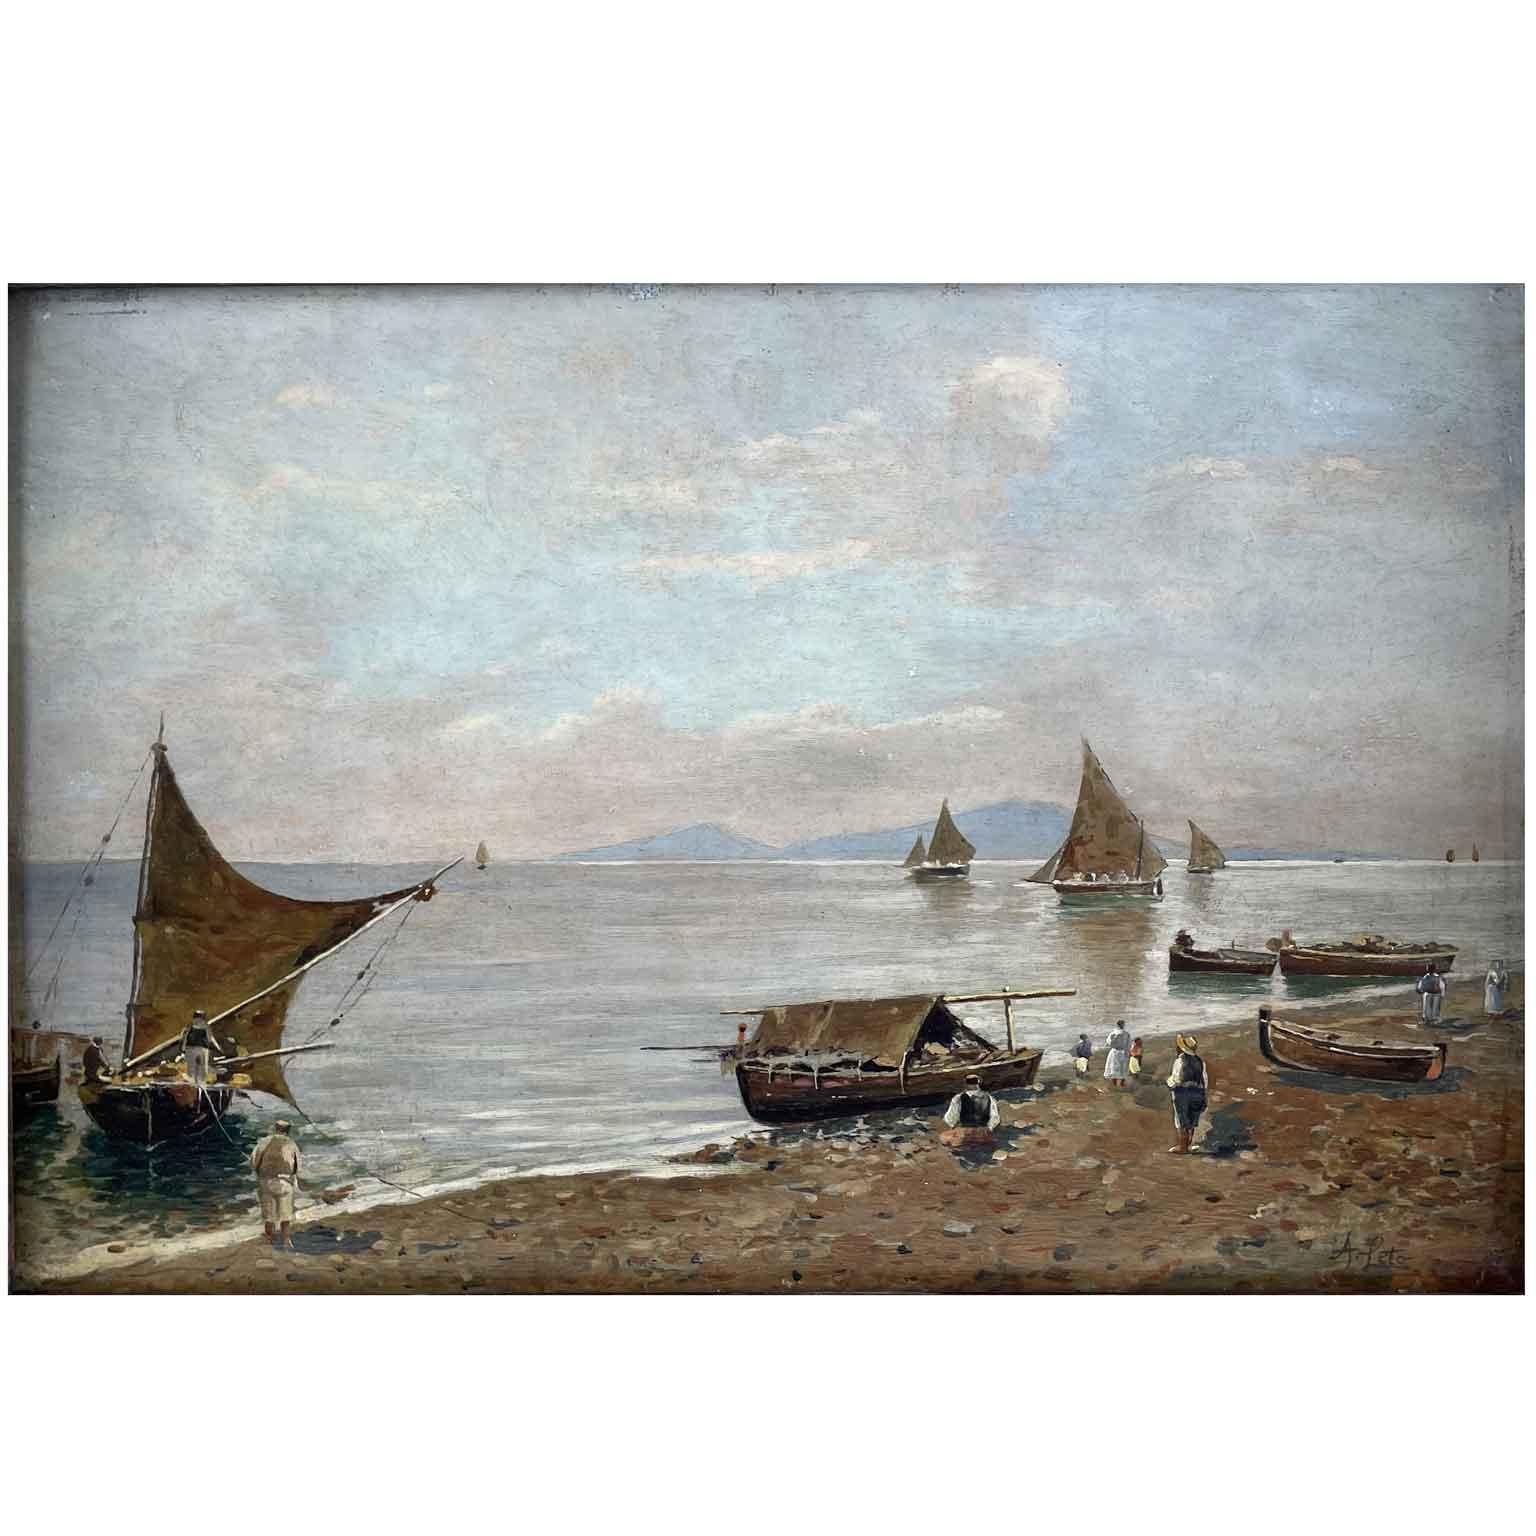 Early 20th century oil on poplar view of a Southern Italian bay, a coastal landscape with fishermen and boats signed by the Sicilian landscape artist of the Belle Époque Antonino Leto, called Leto de Capri, Monreale near Palermo 1844 – 1913